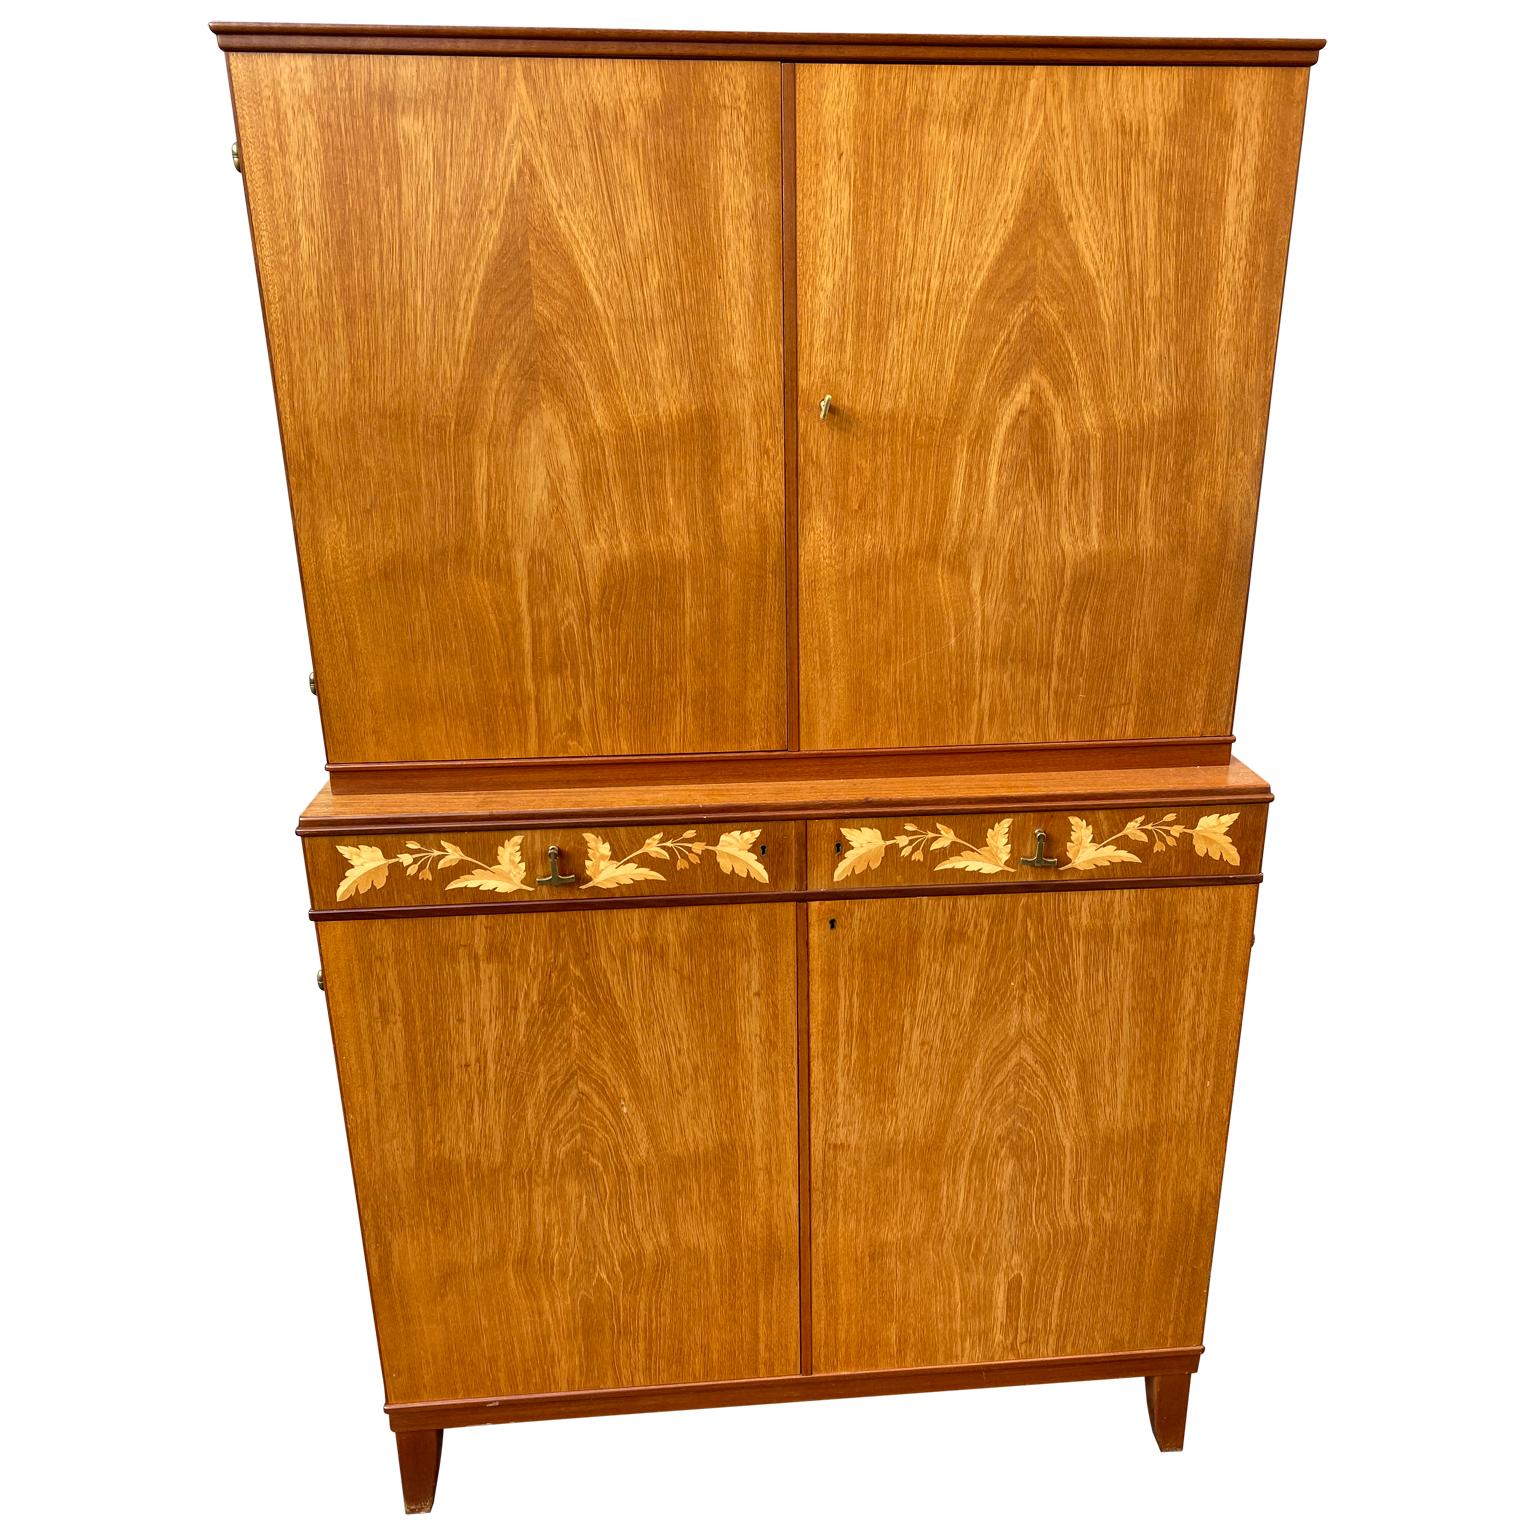 A sharp looking Swedish-made cabinet by J.O. Carlssons.
The cabinet has two drawers with original brass hardward and citrus veneer inlaid flower decorations. It is in good sturdy condition. Lower part of the cabinet has options for two shelves,